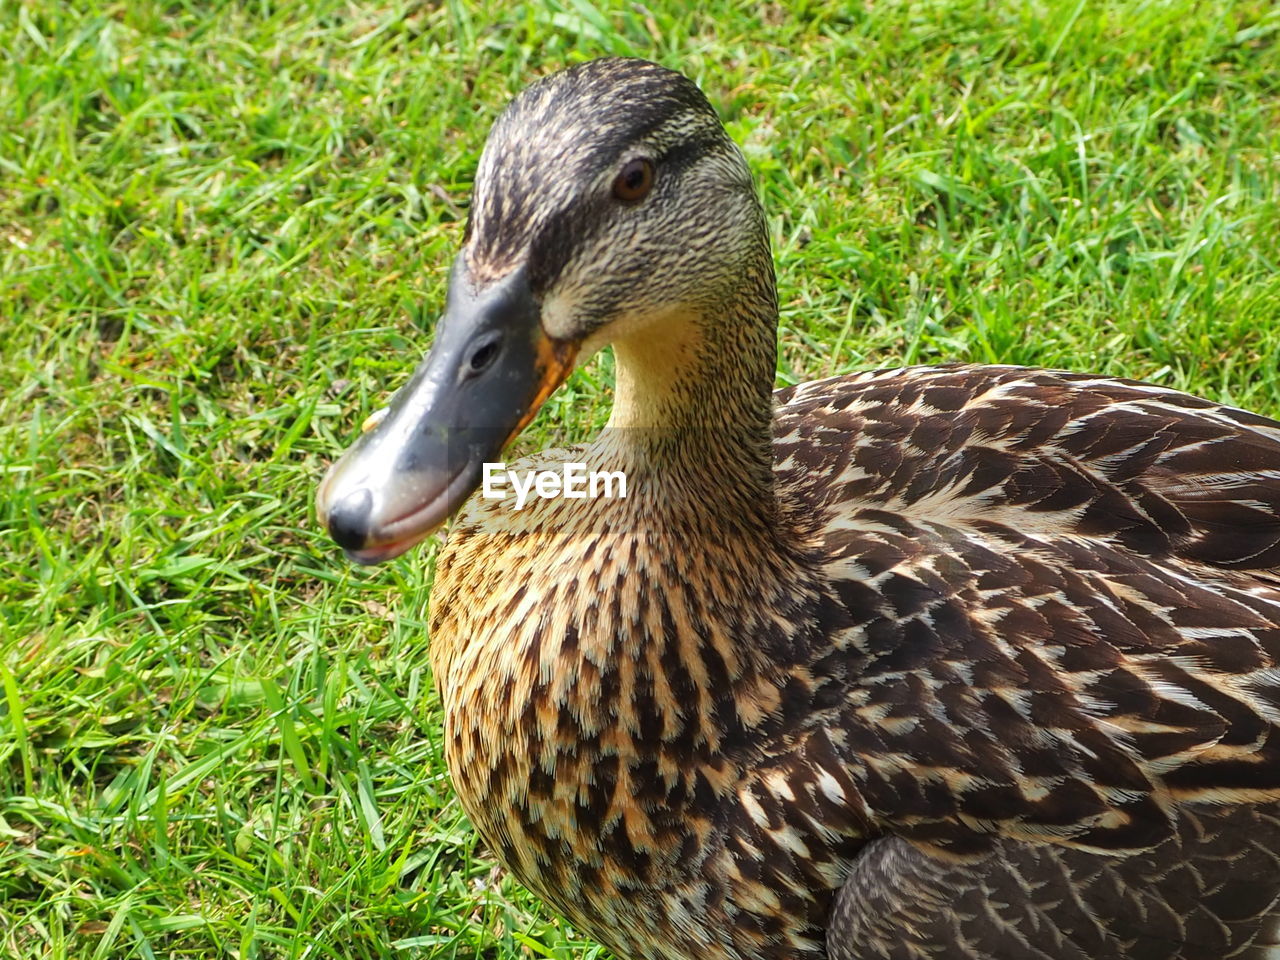 CLOSE-UP OF A DUCK IN FIELD